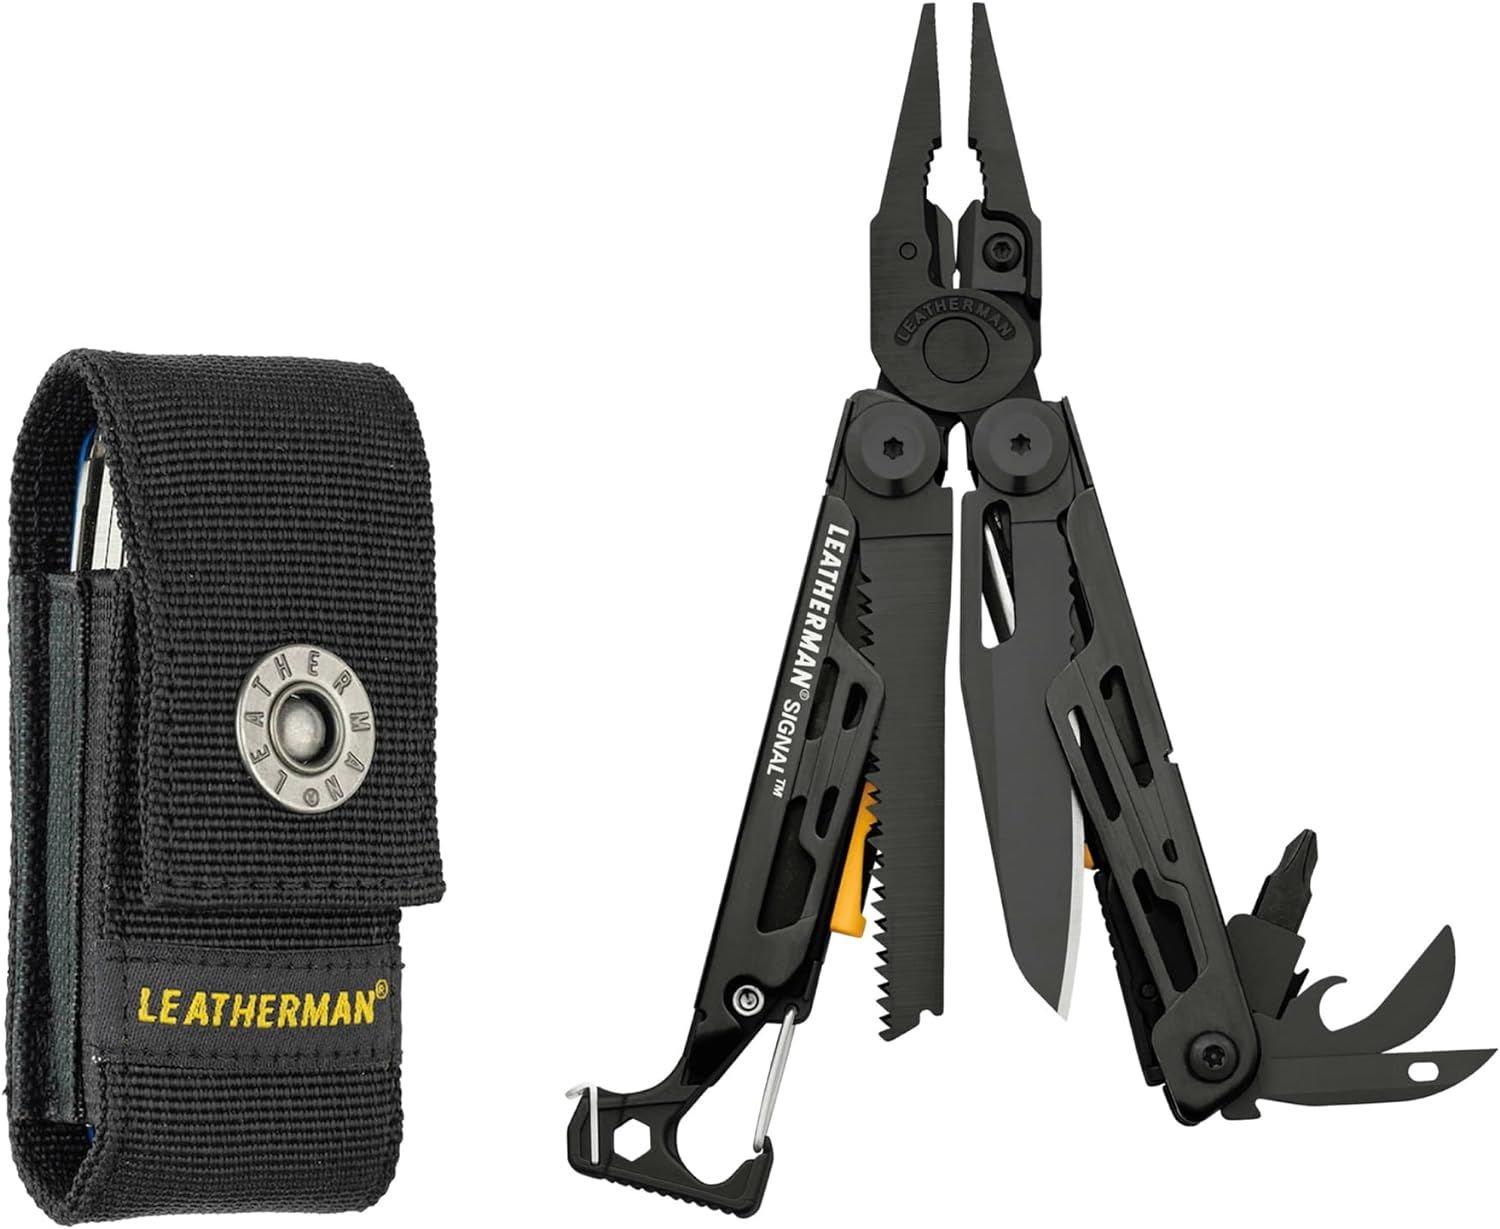 LEATHERMAN, Signal, 19-in-1 Multi-tool for Outdoors, Camping, Hiking, Fishing, Survival, Durable ... | Amazon (US)